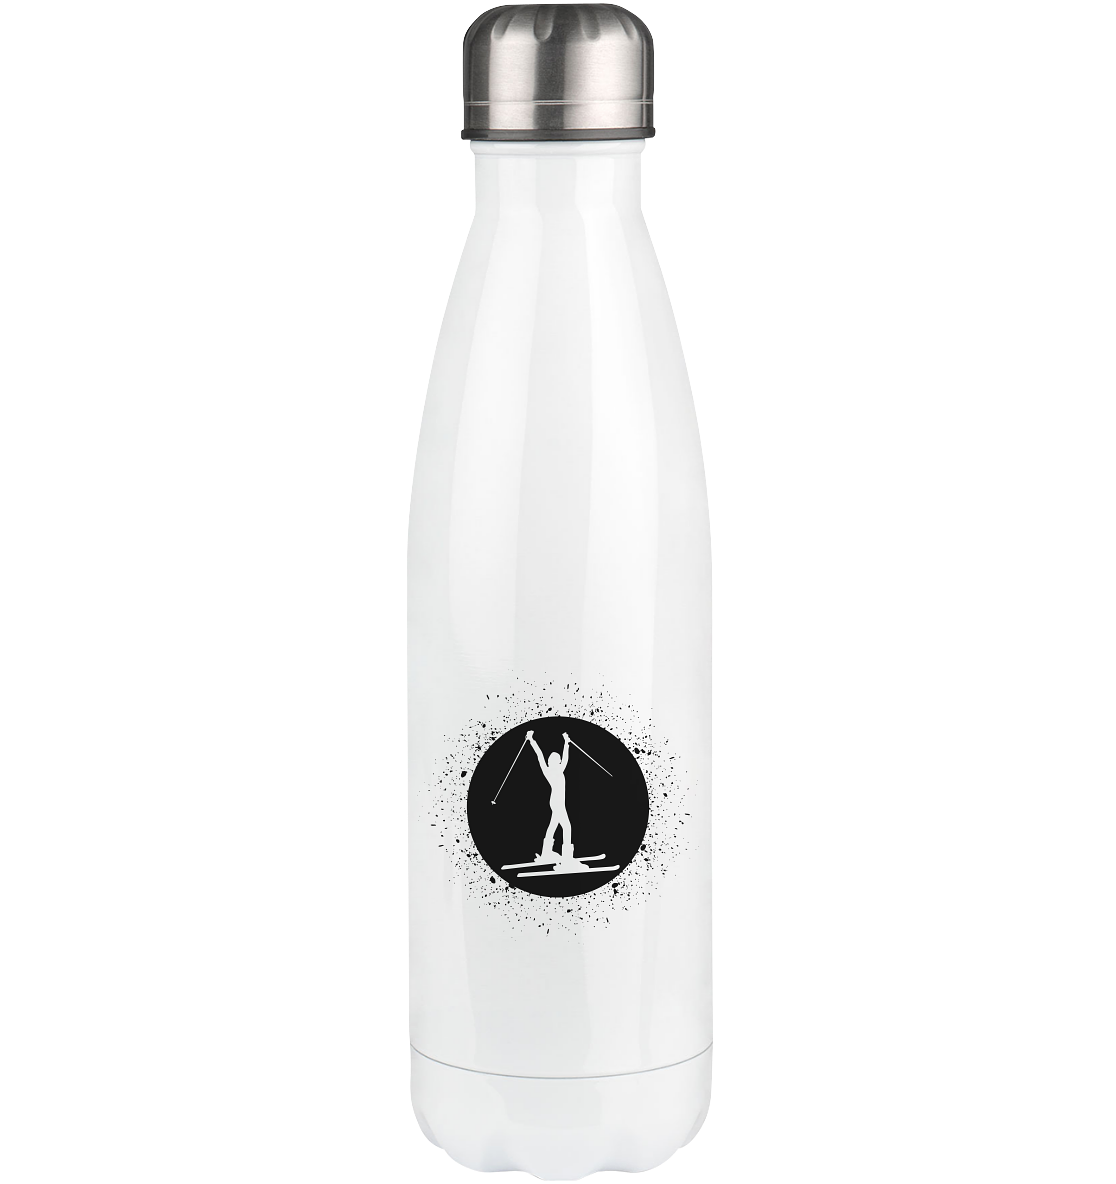 Circle with Splash and Skiing - Edelstahl Thermosflasche klettern ski 500ml